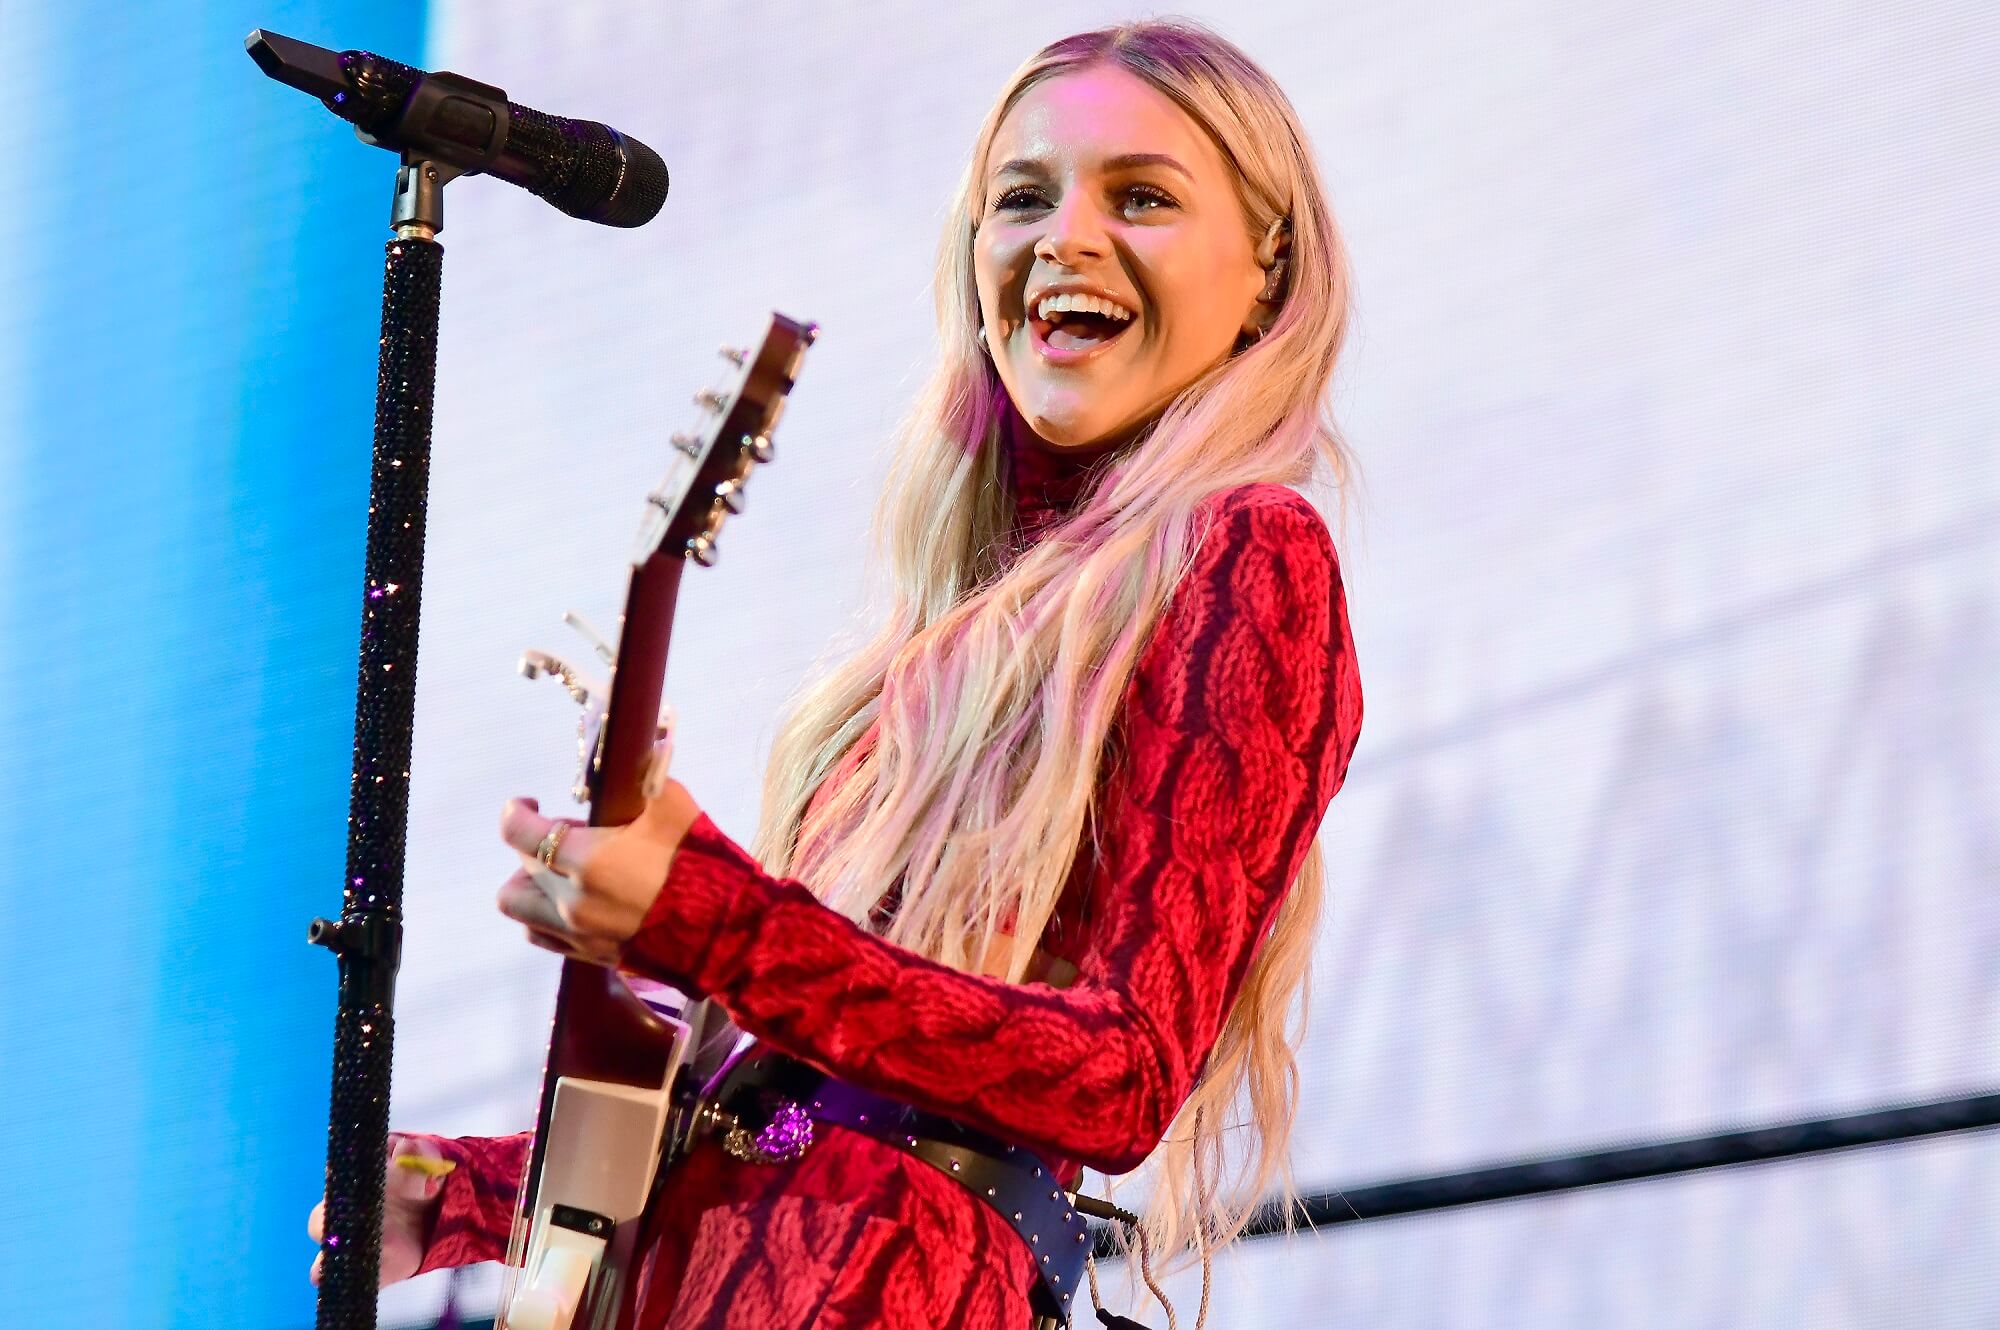 Kelsea Ballerini smiles while performing onstage with a guitar